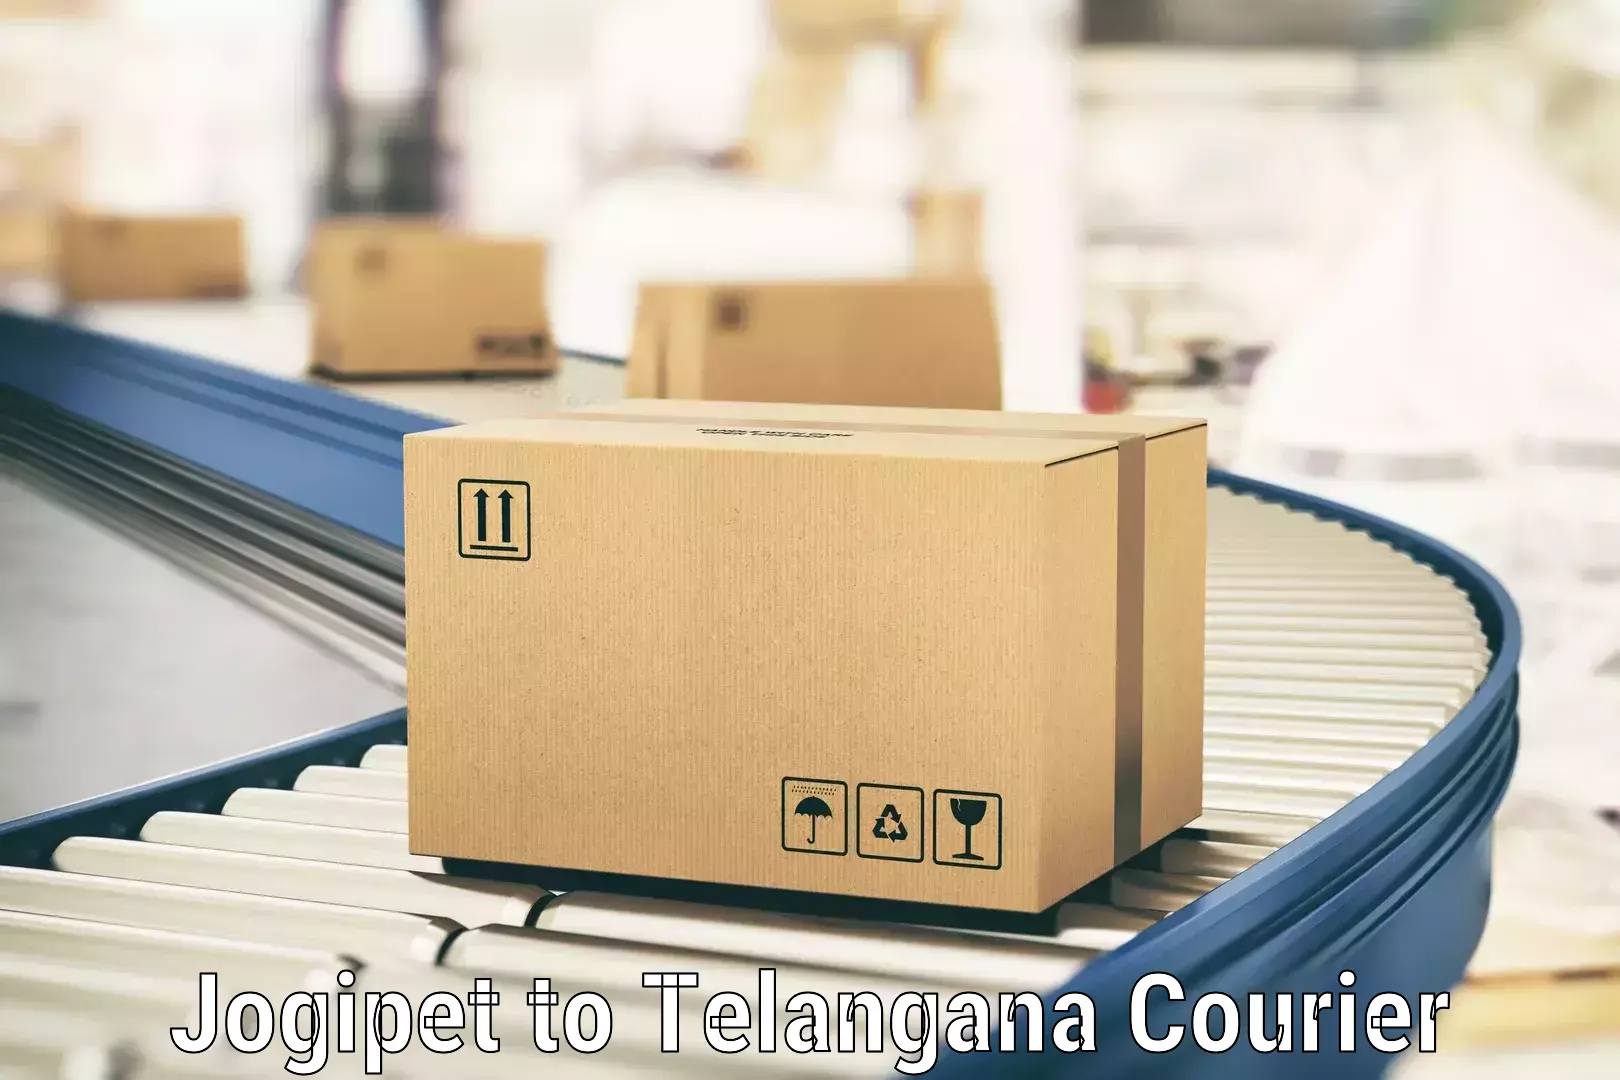 Quality courier partnerships Jogipet to Gangadhara